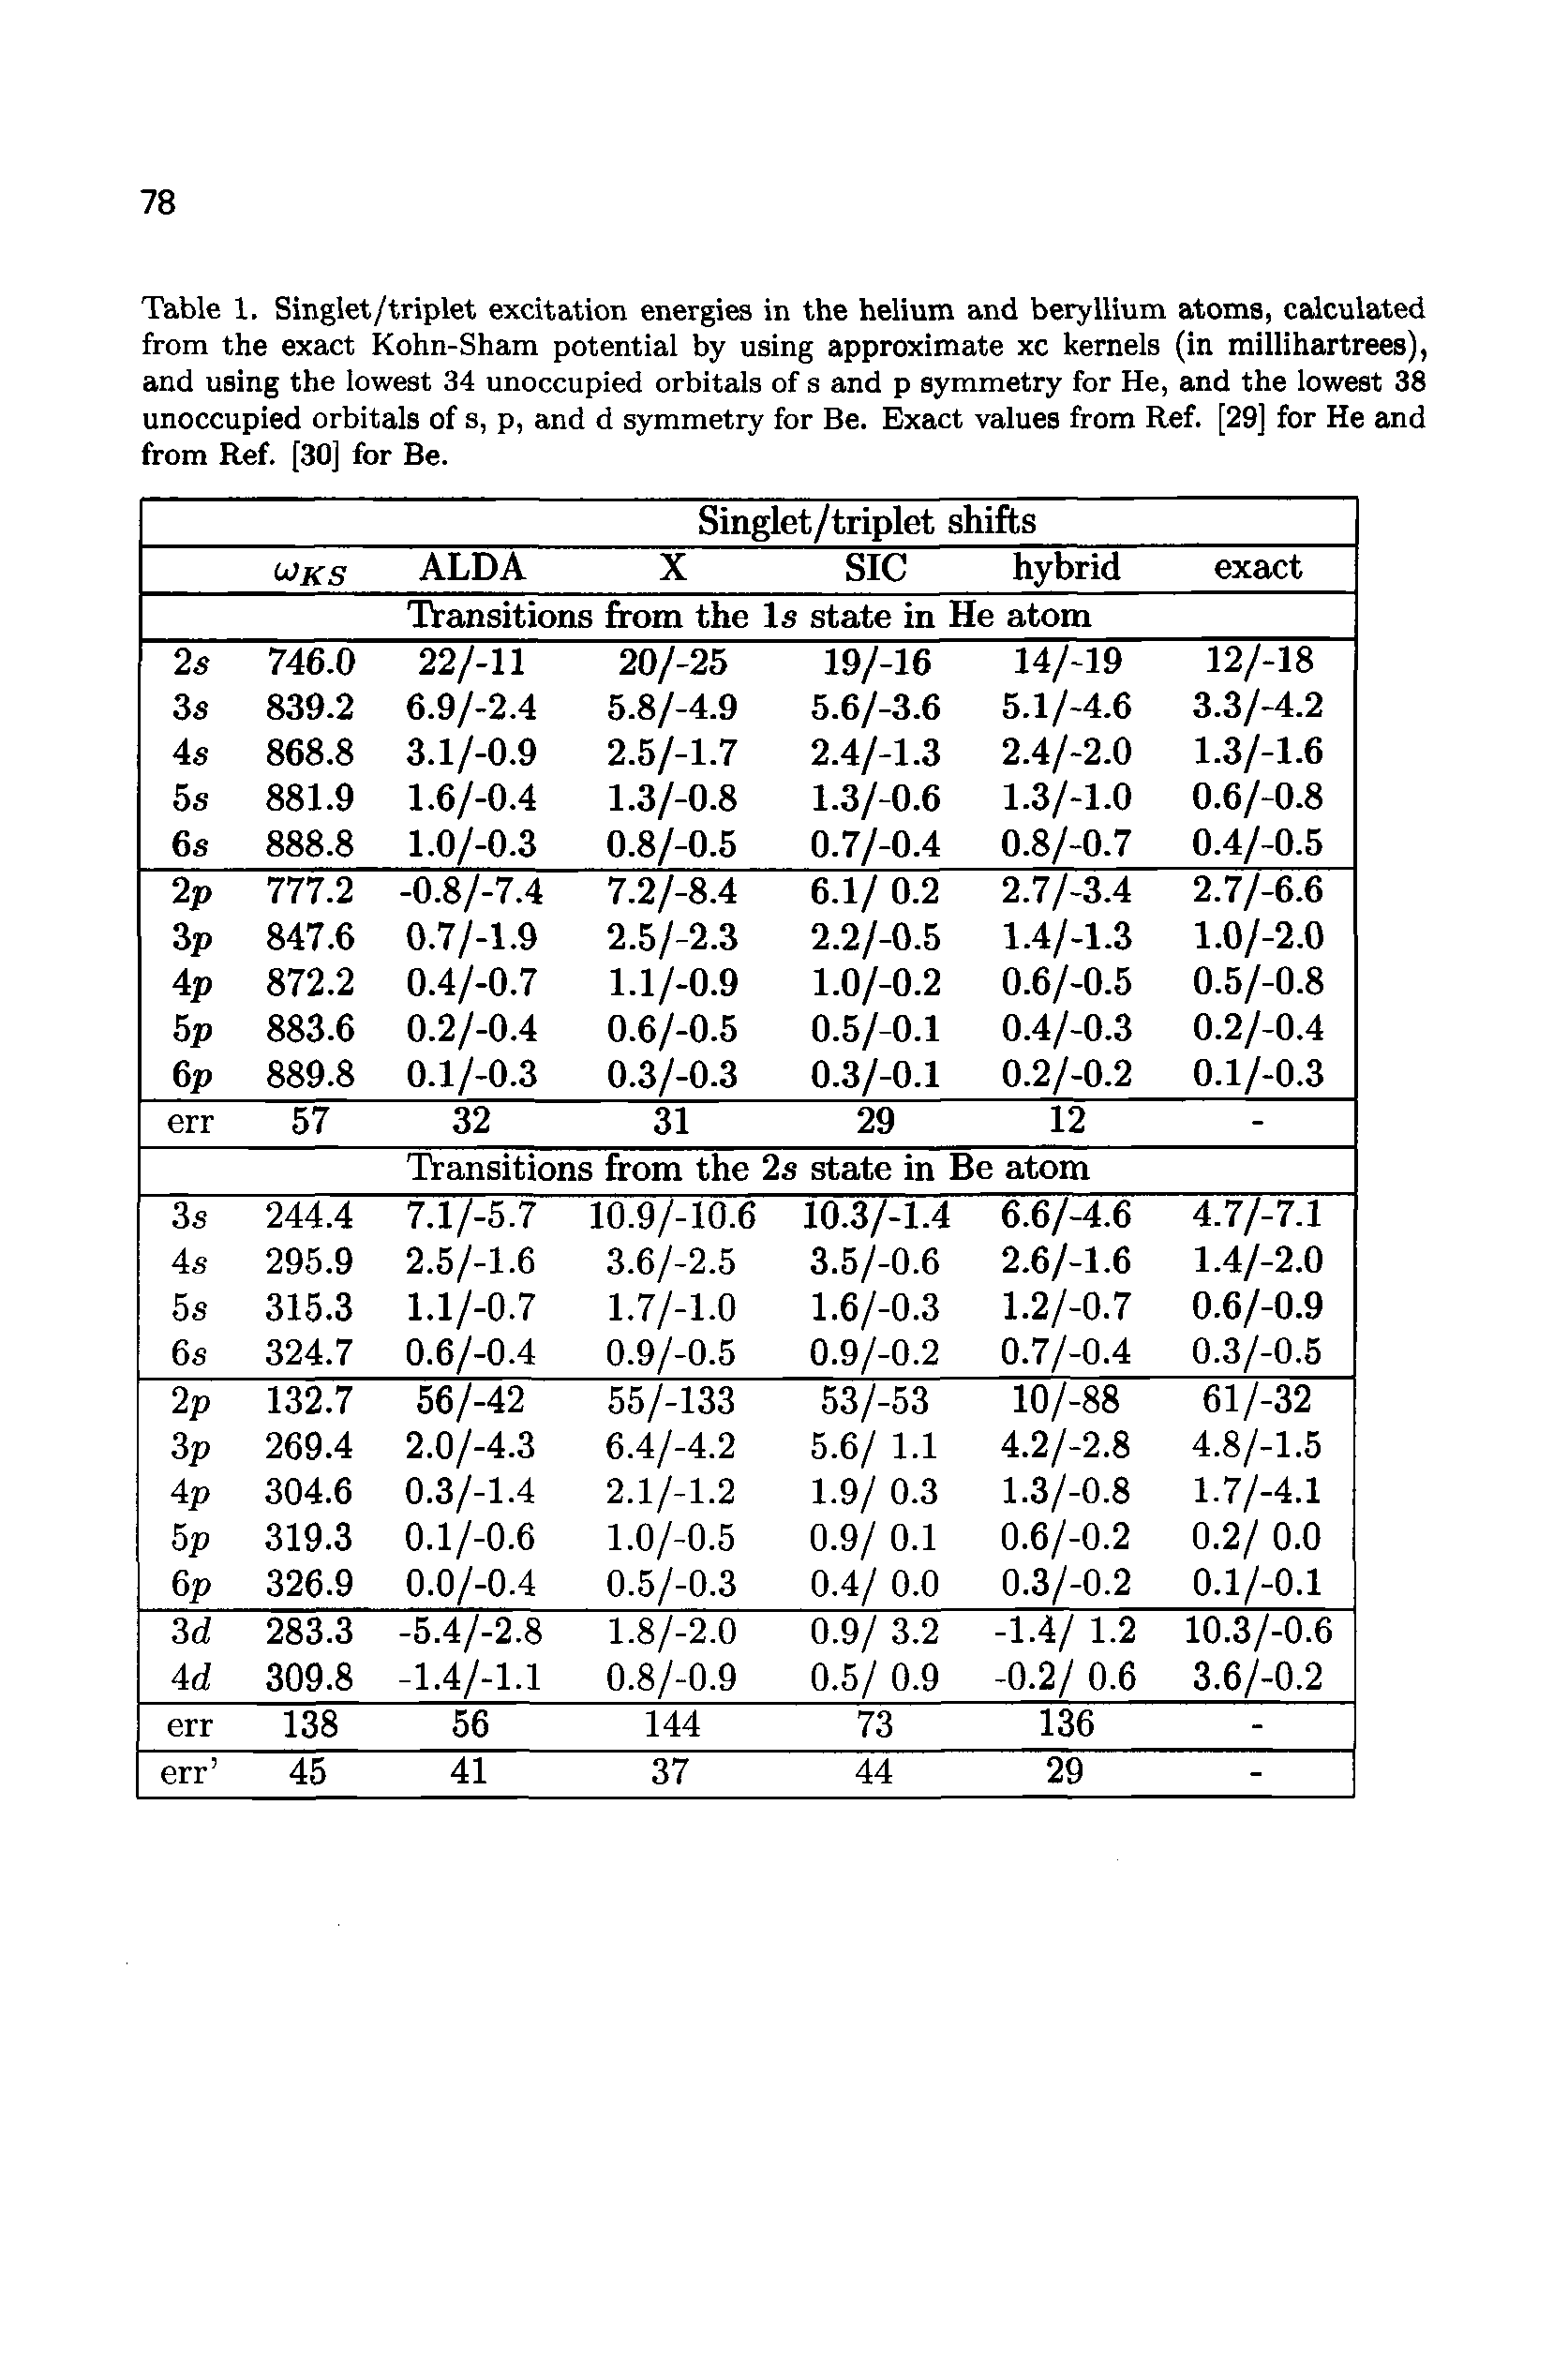 Table 1. Singlet/triplet excitation energies in the helium and beryllium atoms, calculated from the exact Kohn-Sham potential by using approximate xc kernels (in millihartrees), and using the lowest 34 unoccupied orbitals of s and p symmetry for He, and the lowest 38 unoccupied orbitals of s, p, and d symmetry for Be. Exact values from Ref. [29] for He and from Ref. [30] for Be.